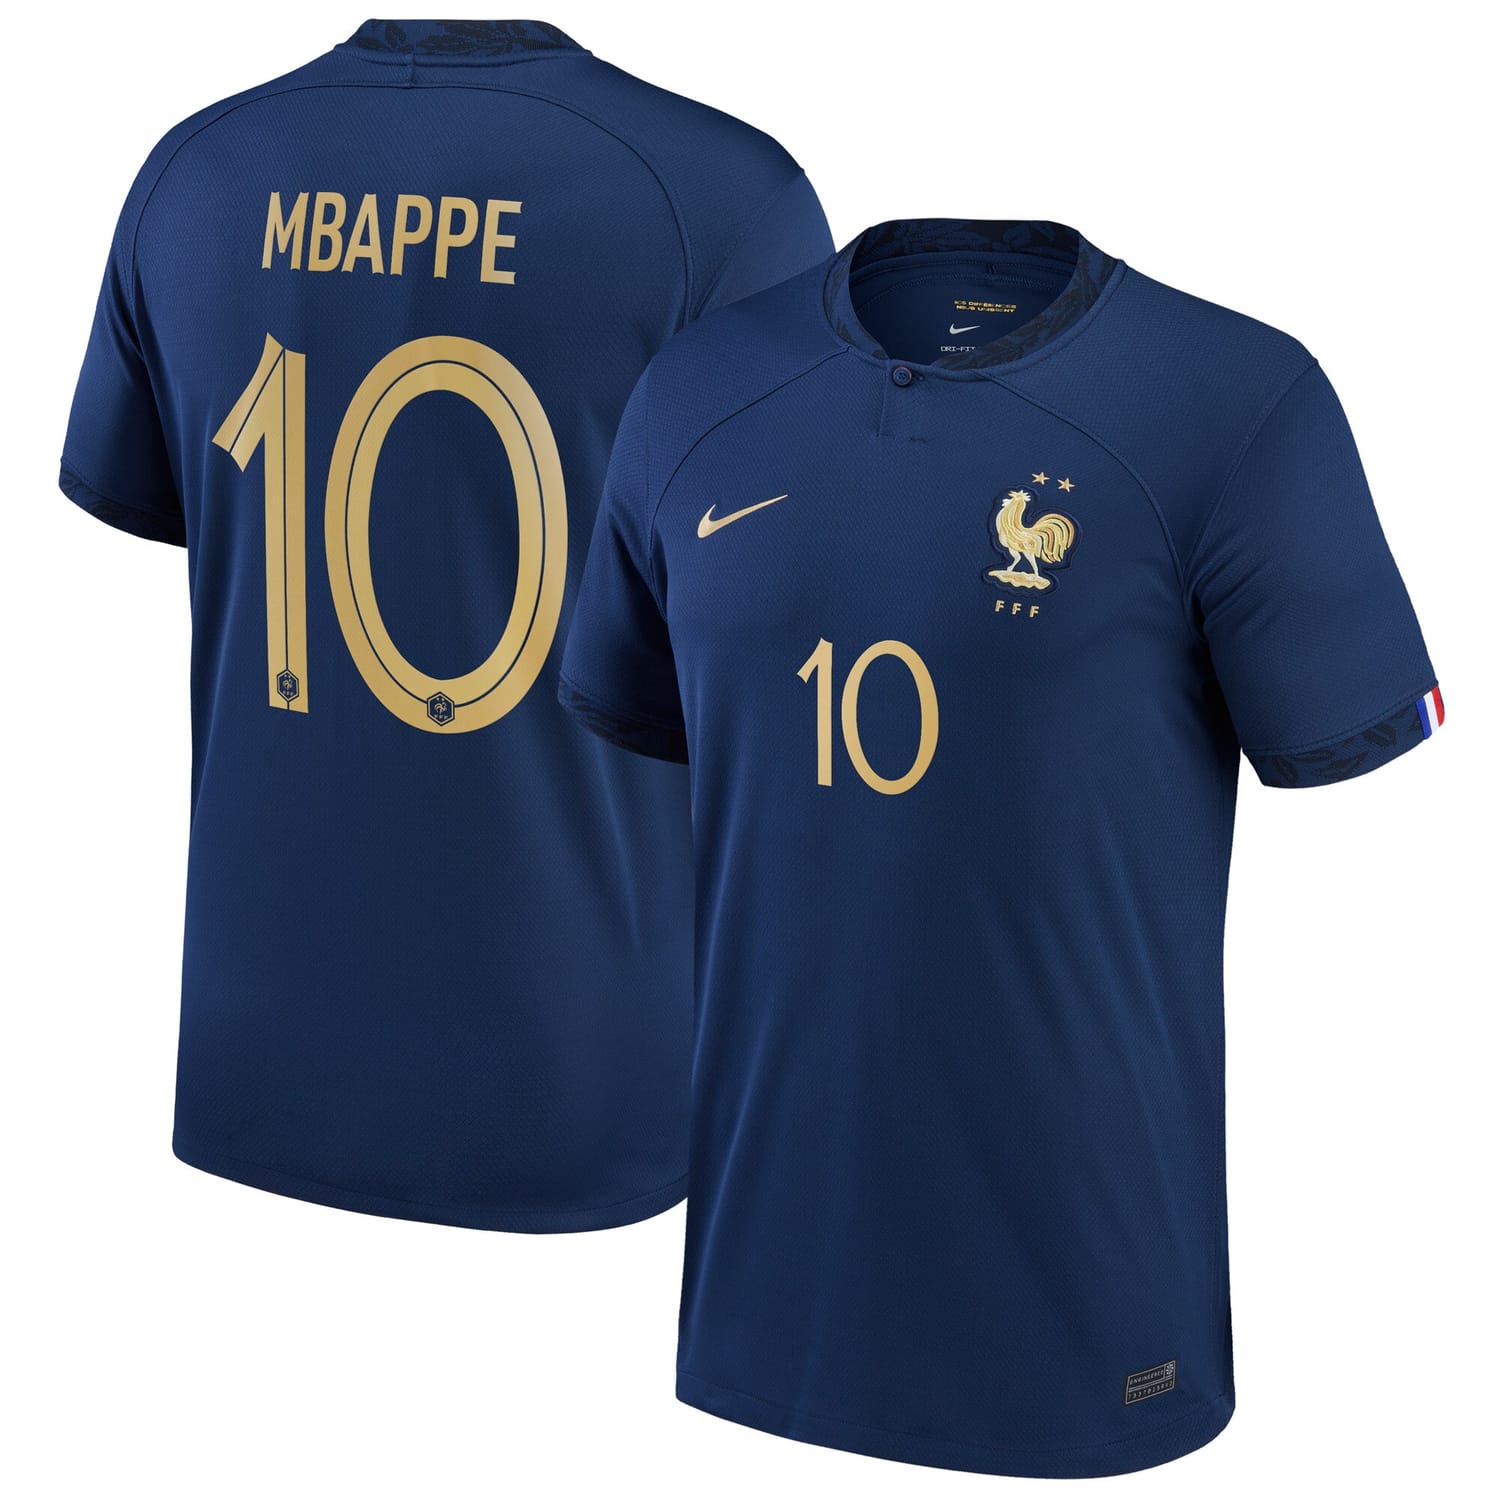 France National Team Home Jersey Shirt Navy 2022-23 player Kylian Mbappe printing for Men